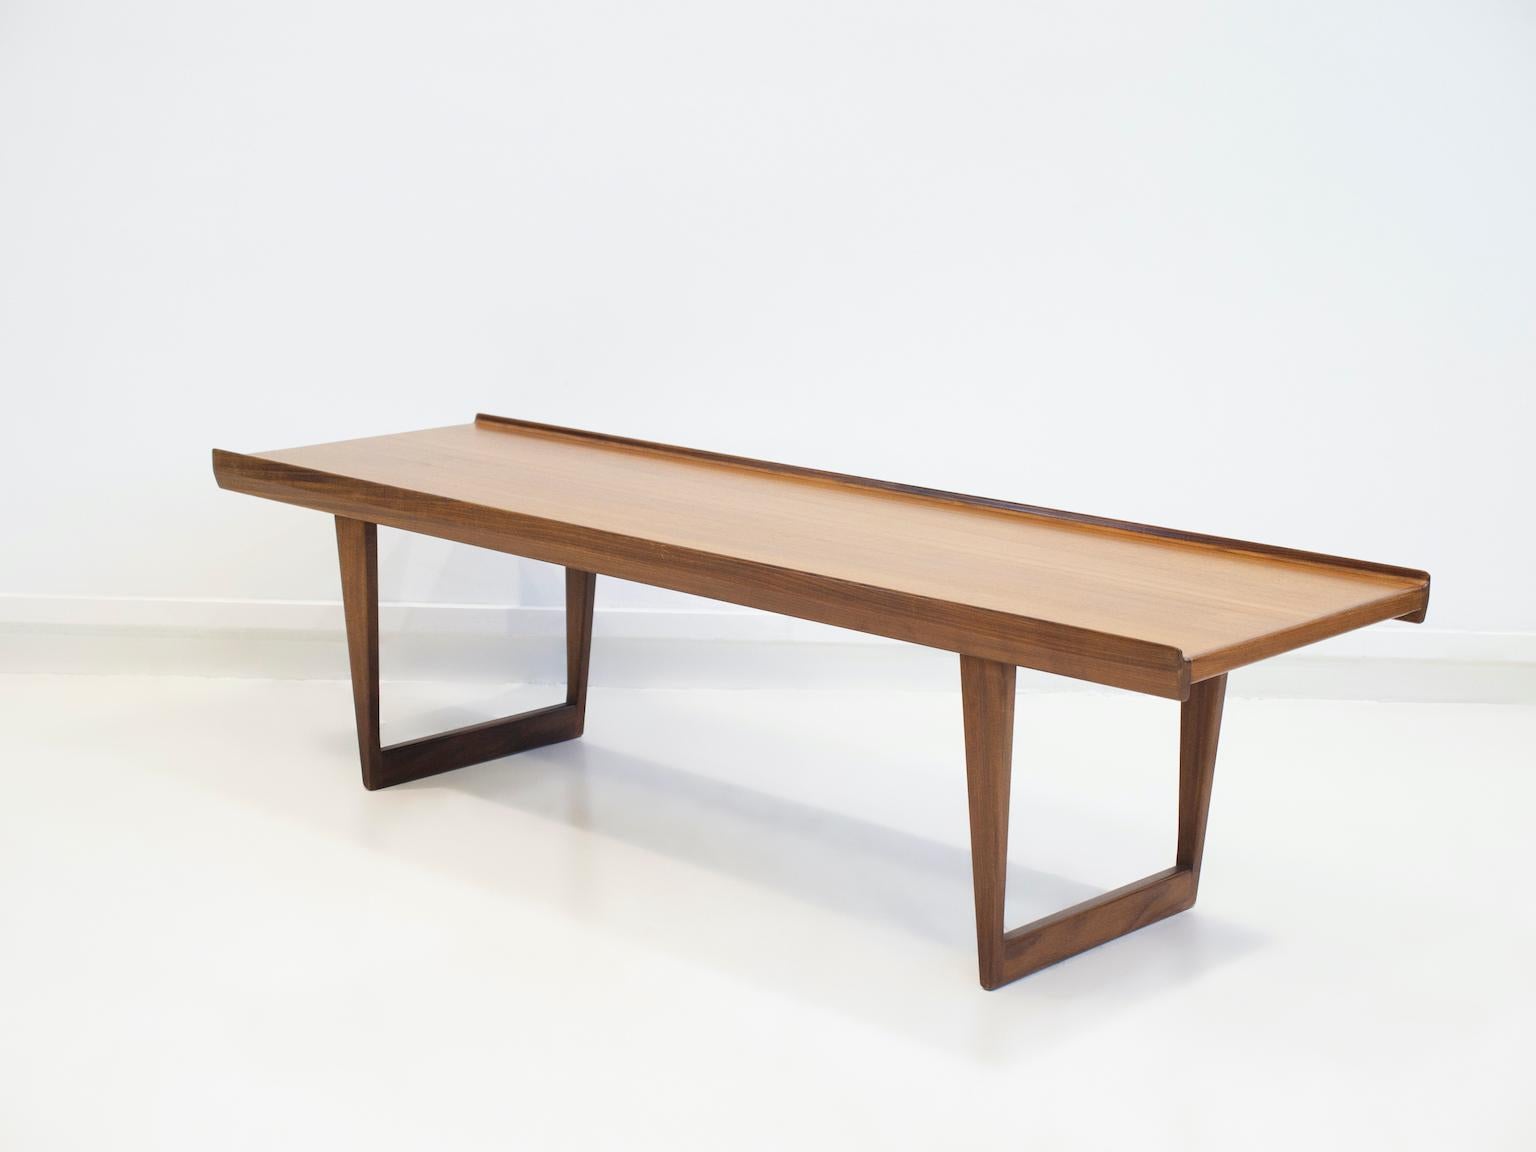 Coffee, side or sofa table of teak wood with higher edges mounted on v-shaped legs. Designed by Peter Løvig Nielsen and manufactured by Hedensted Møbelfabrik in the 1960s.